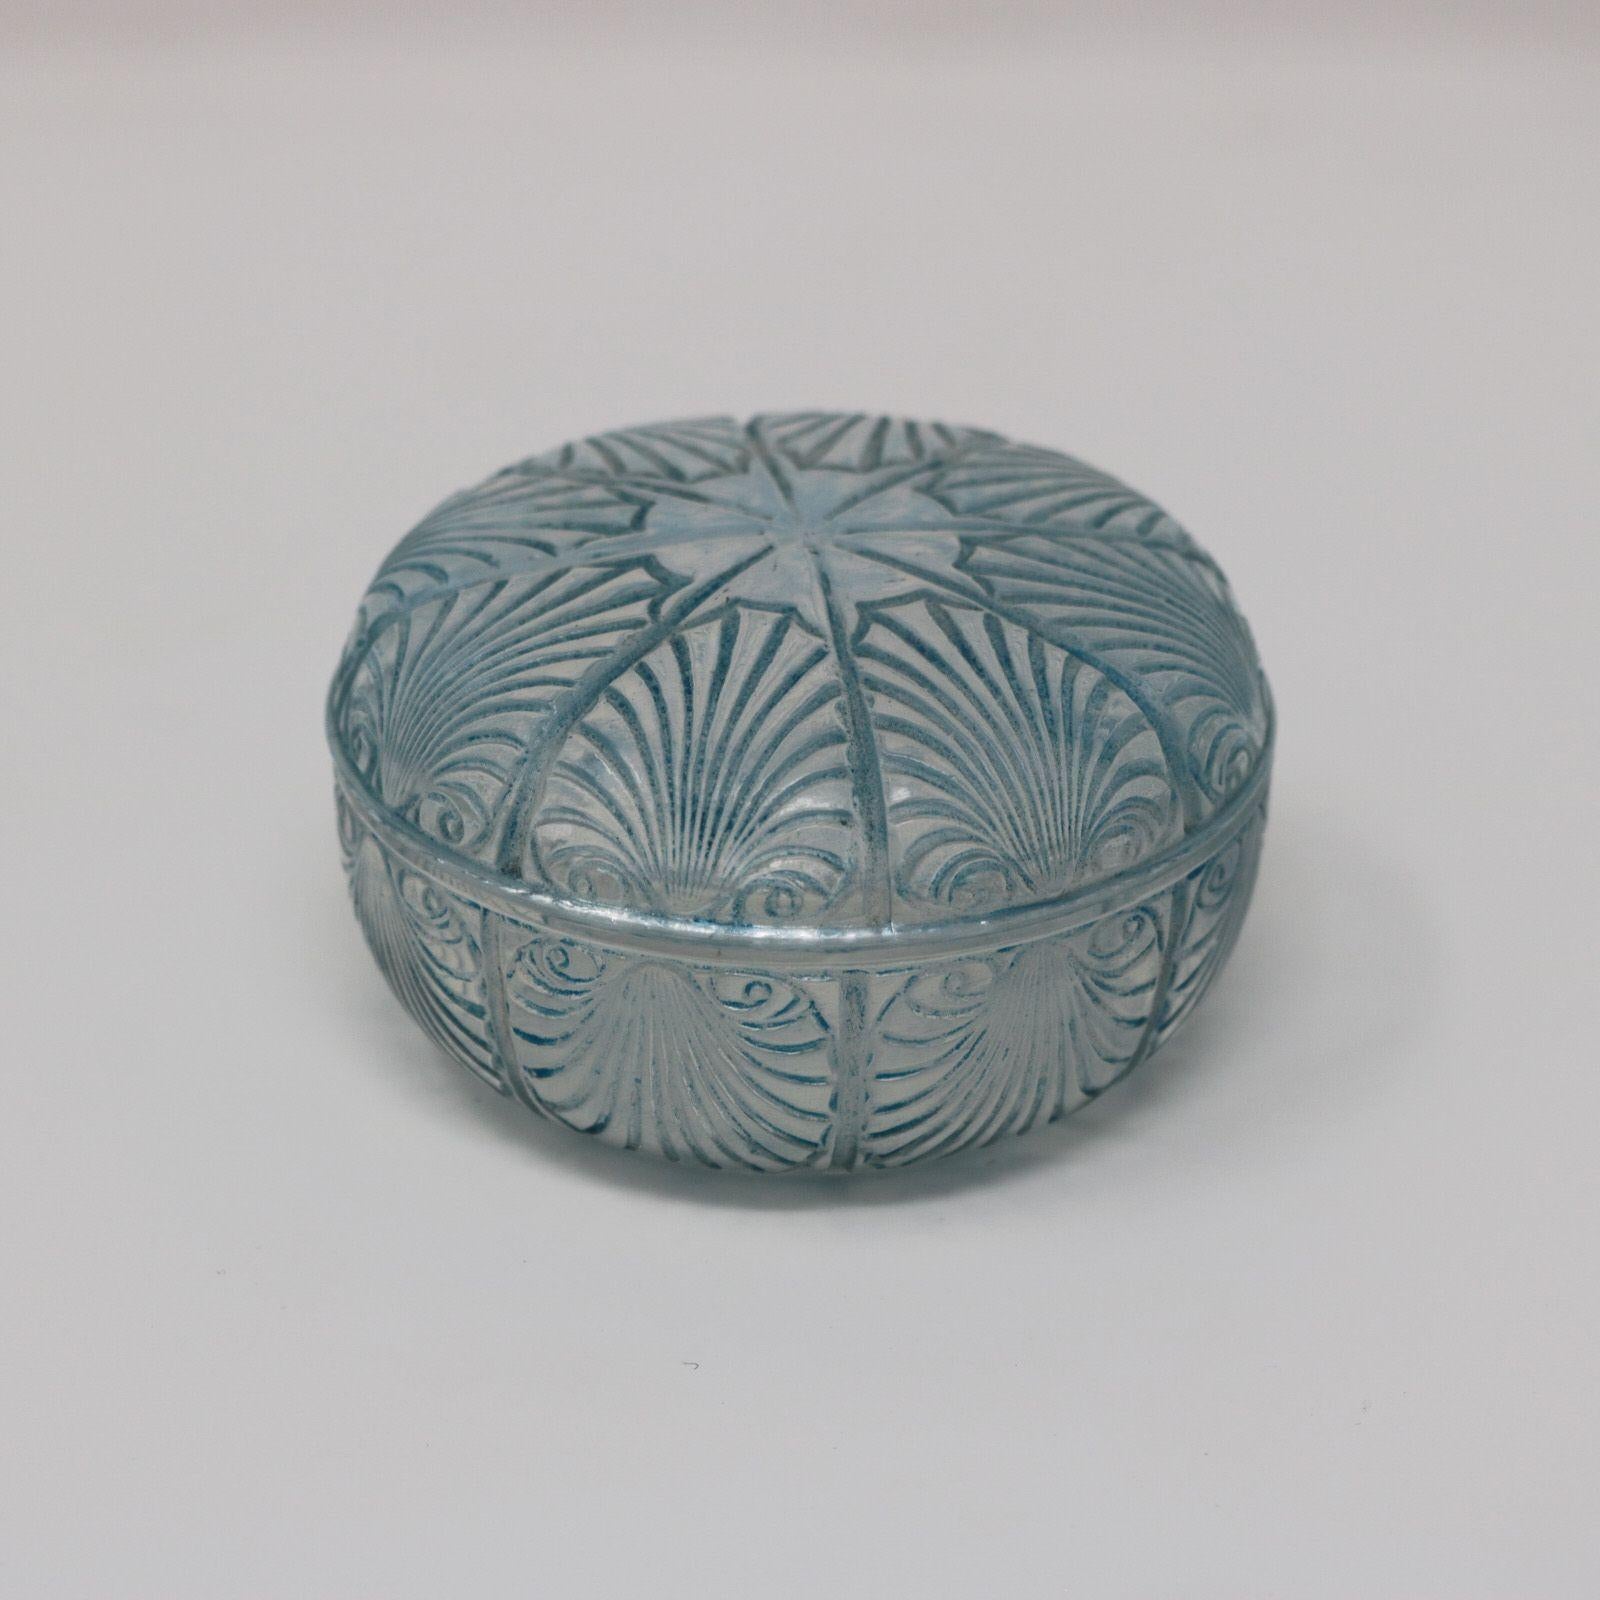 Rene Lalique opalescent glass, 'Coquilles' box. Blue stained detailing. This pattern features cockle shells. Stencilled makers mark to the underside of the base, 'R LALIQUE'. Book reference: Marcilhac 71.